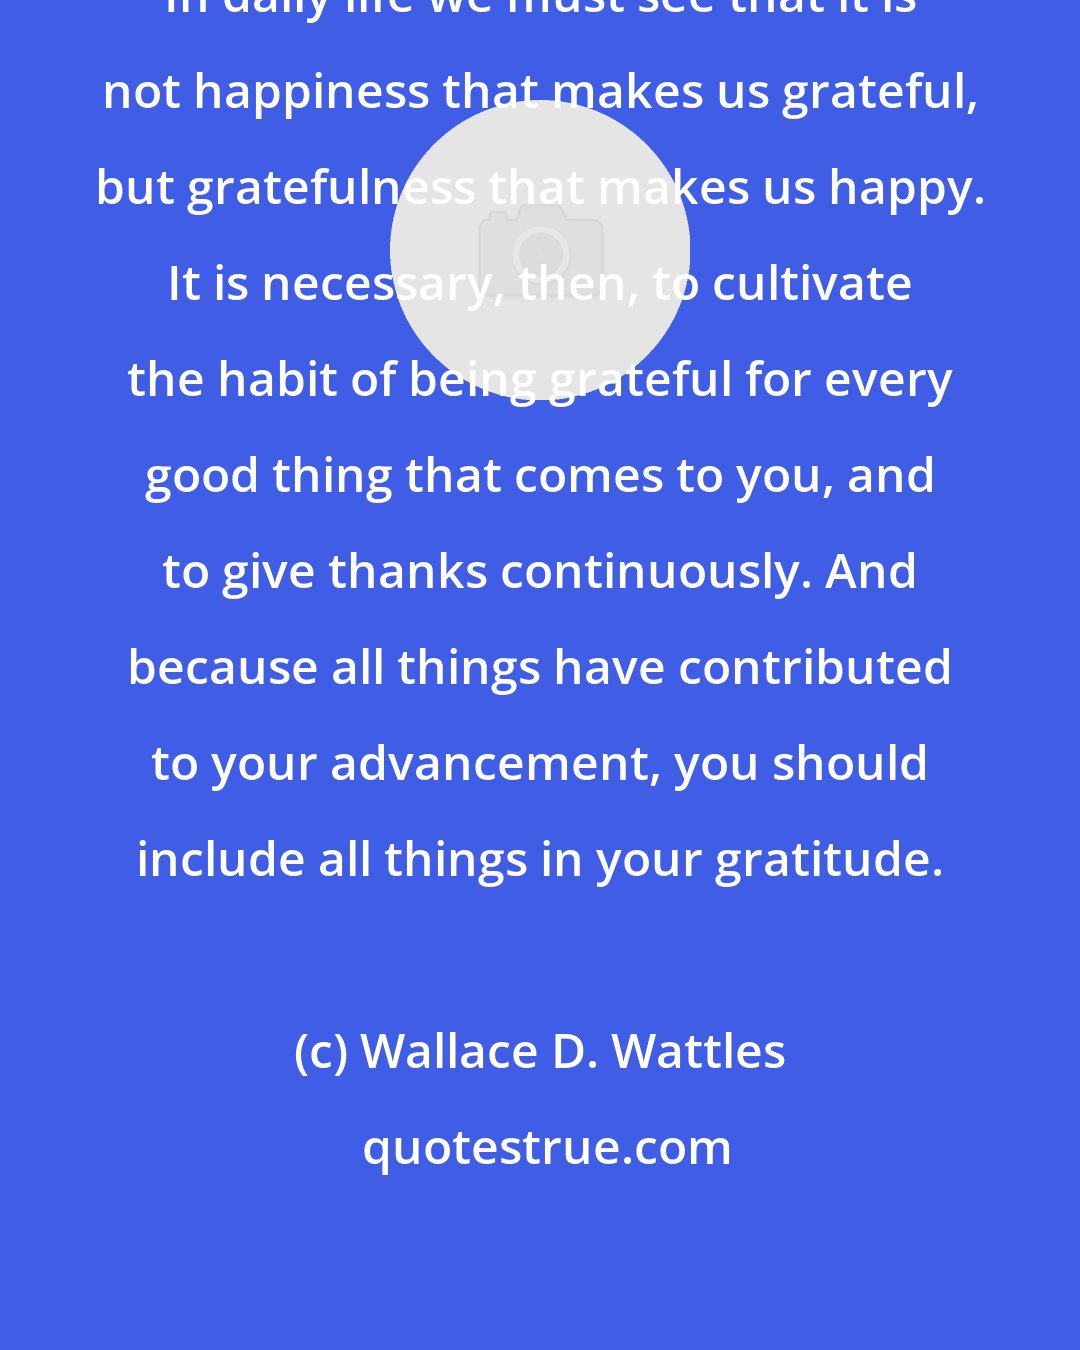 Wallace D. Wattles: In daily life we must see that it is not happiness that makes us grateful, but gratefulness that makes us happy. It is necessary, then, to cultivate the habit of being grateful for every good thing that comes to you, and to give thanks continuously. And because all things have contributed to your advancement, you should include all things in your gratitude.